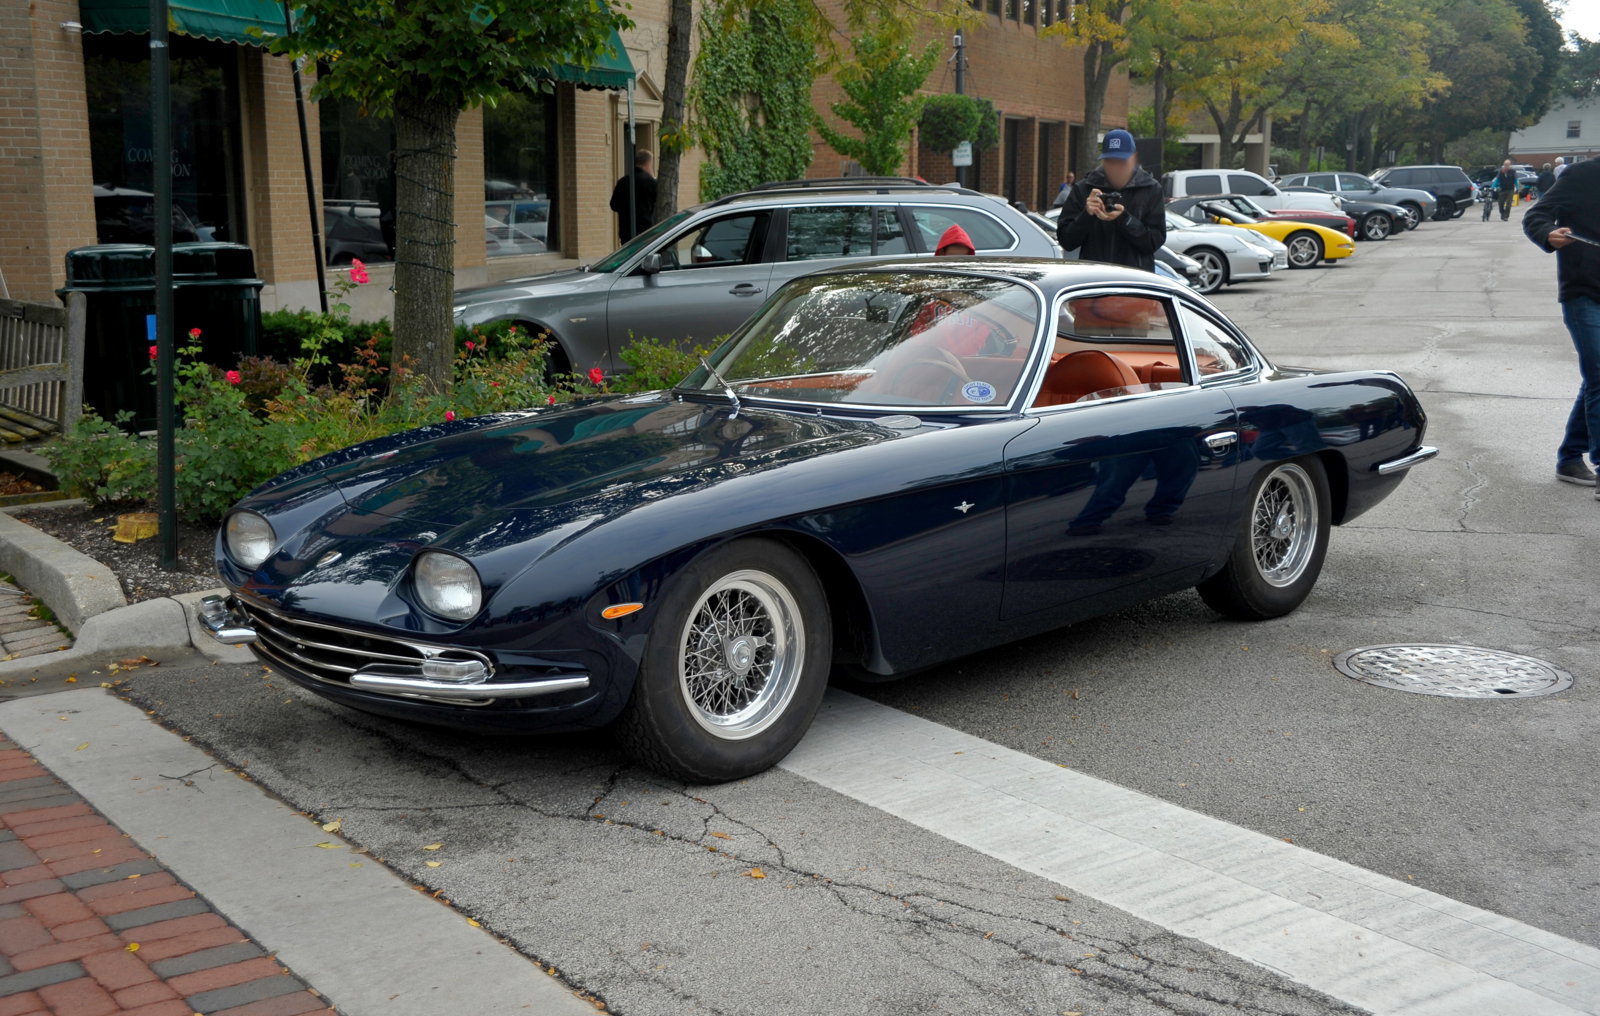 Watch the Photo by itslovesiss with the username @itslovesiss, posted on December 28, 2018 and the text says 'rosspetersen:
1964-1966 Lamborghini 350GT at Fuelfed Coffee and Classics in Winnetka, Illinois.


The 350GT was the first production Lamborghini.  Only 120 were built.  They were powered by 3.5 liter V12 engines that produced 284 horsepower (209 kW) and..'